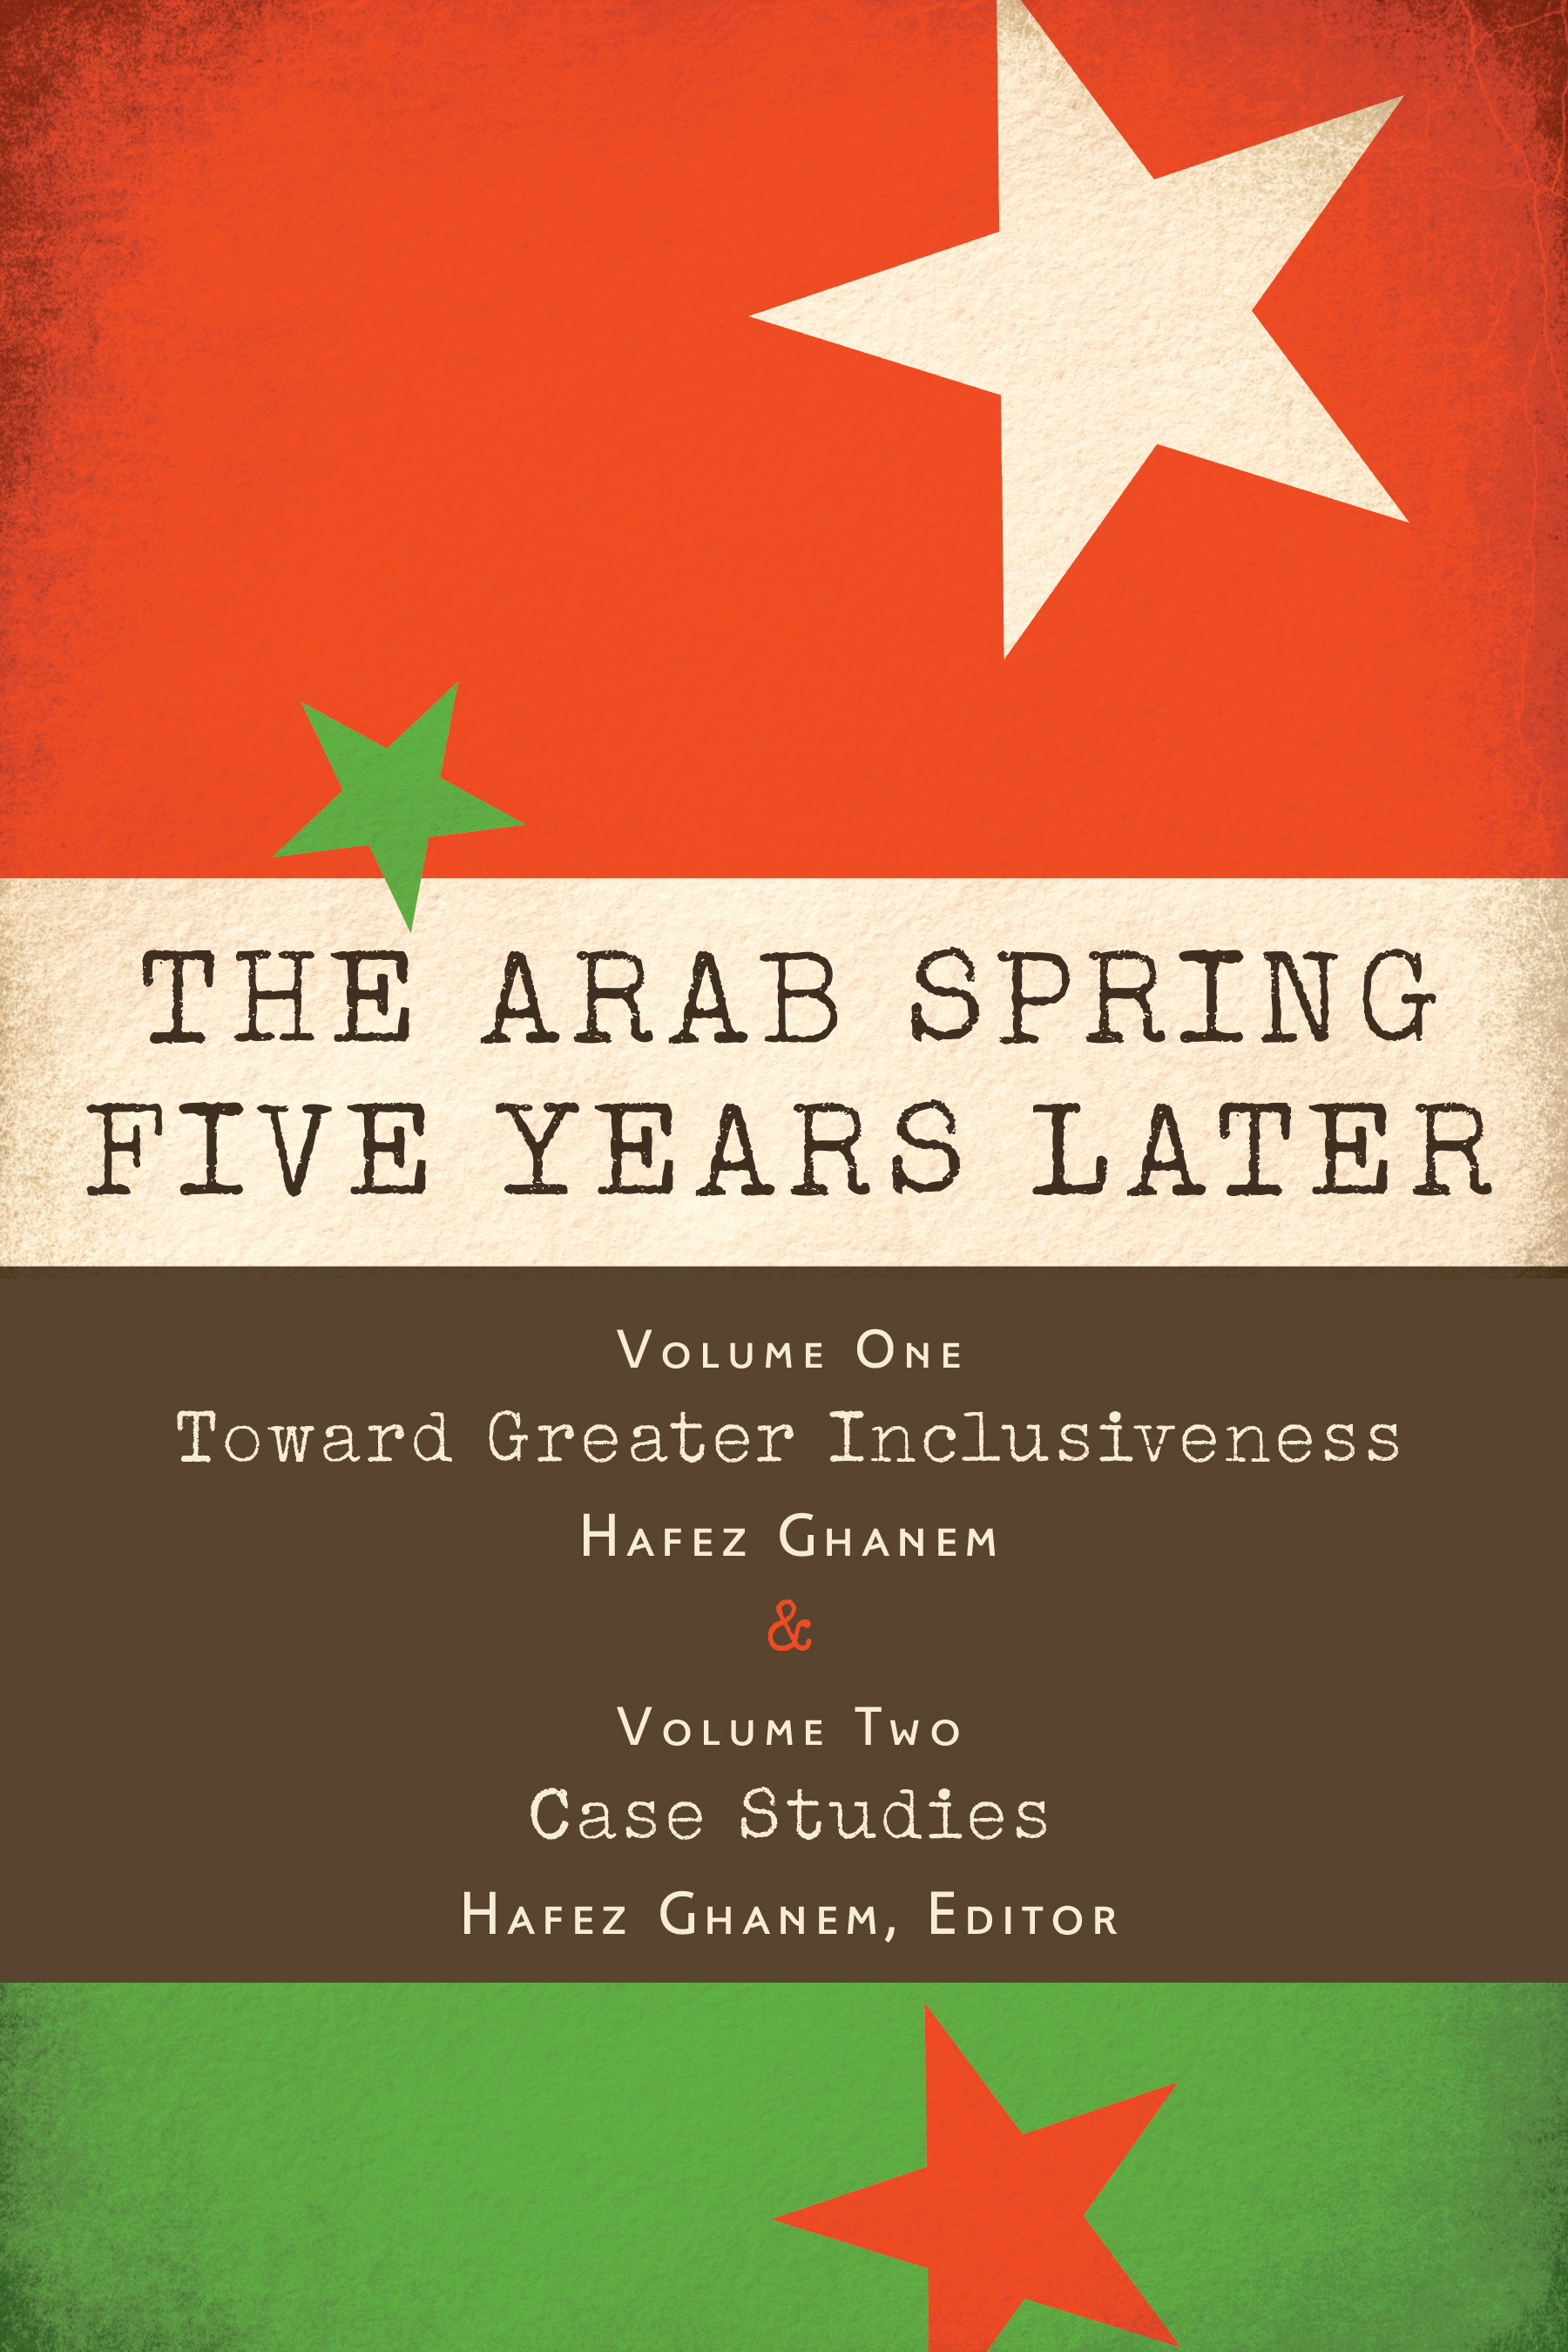 The Arab Spring Five Years Later